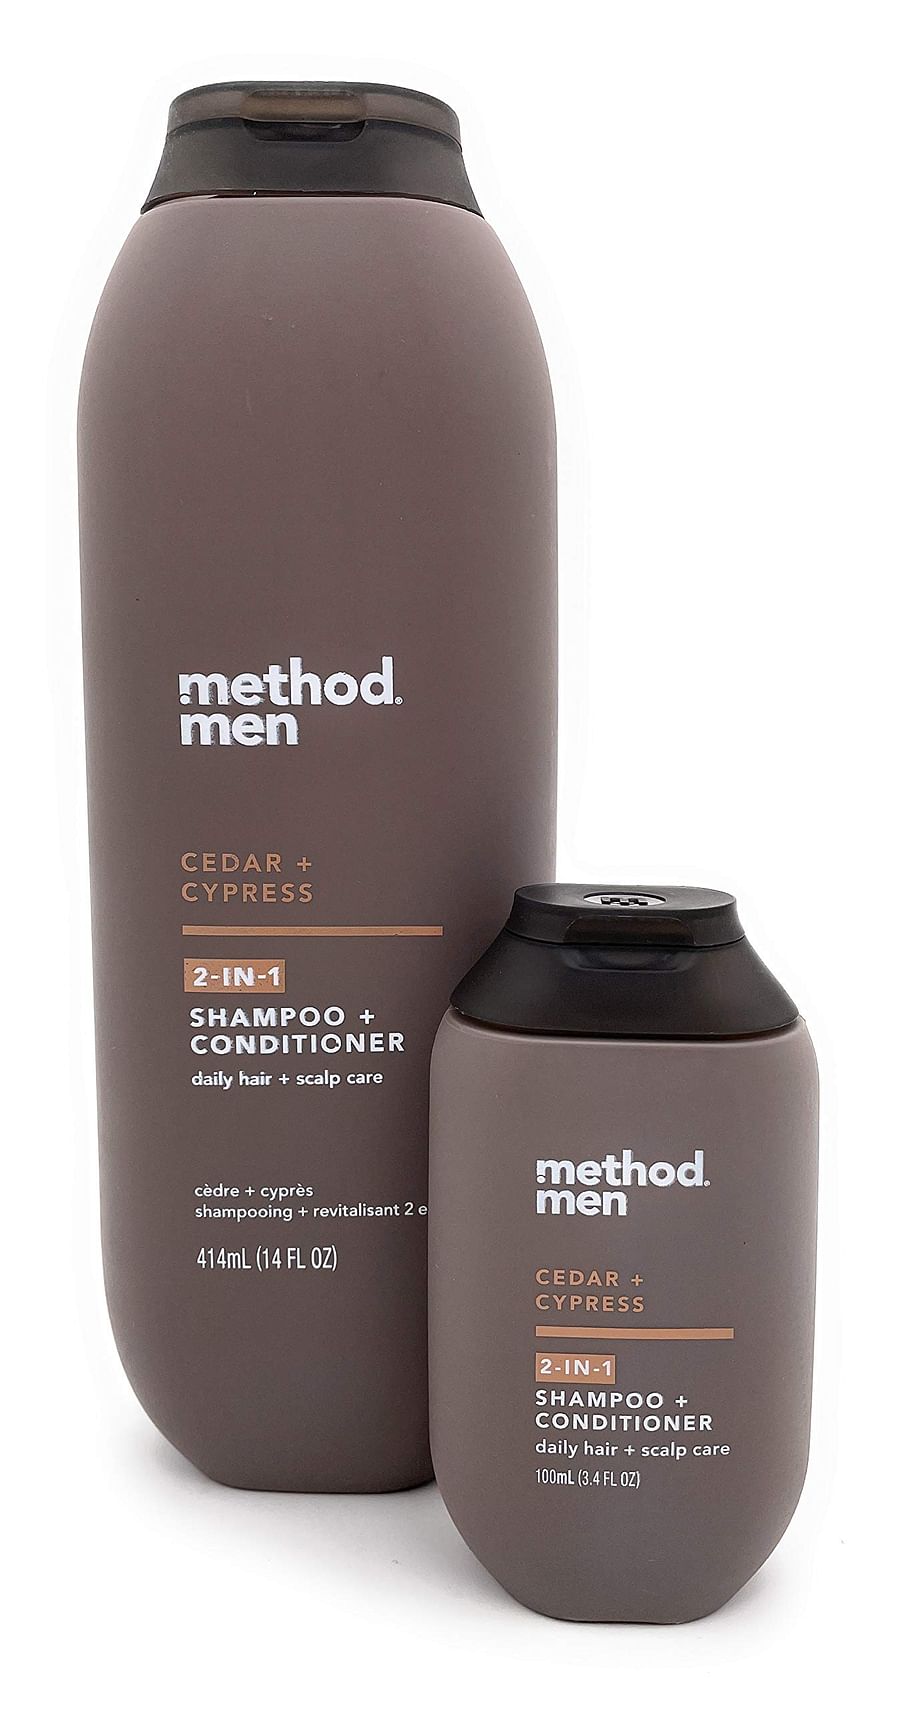 A selection of mens shampoo and conditioner